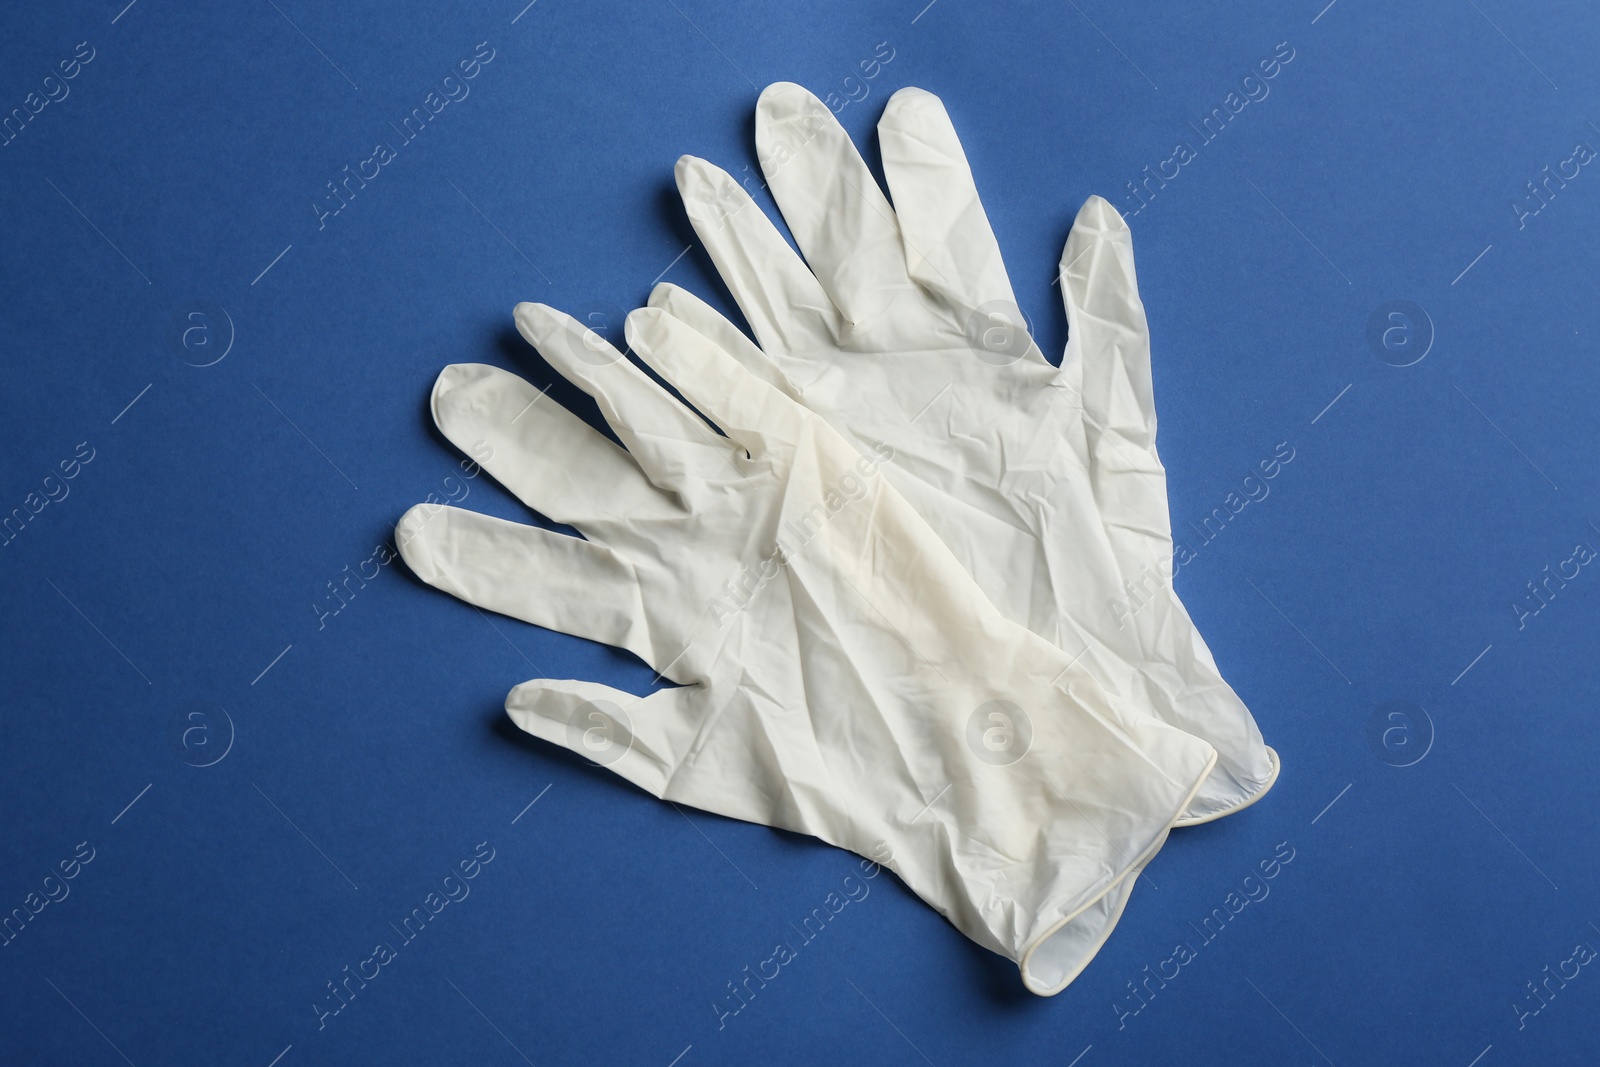 Photo of Pair of medical gloves on blue background, flat lay